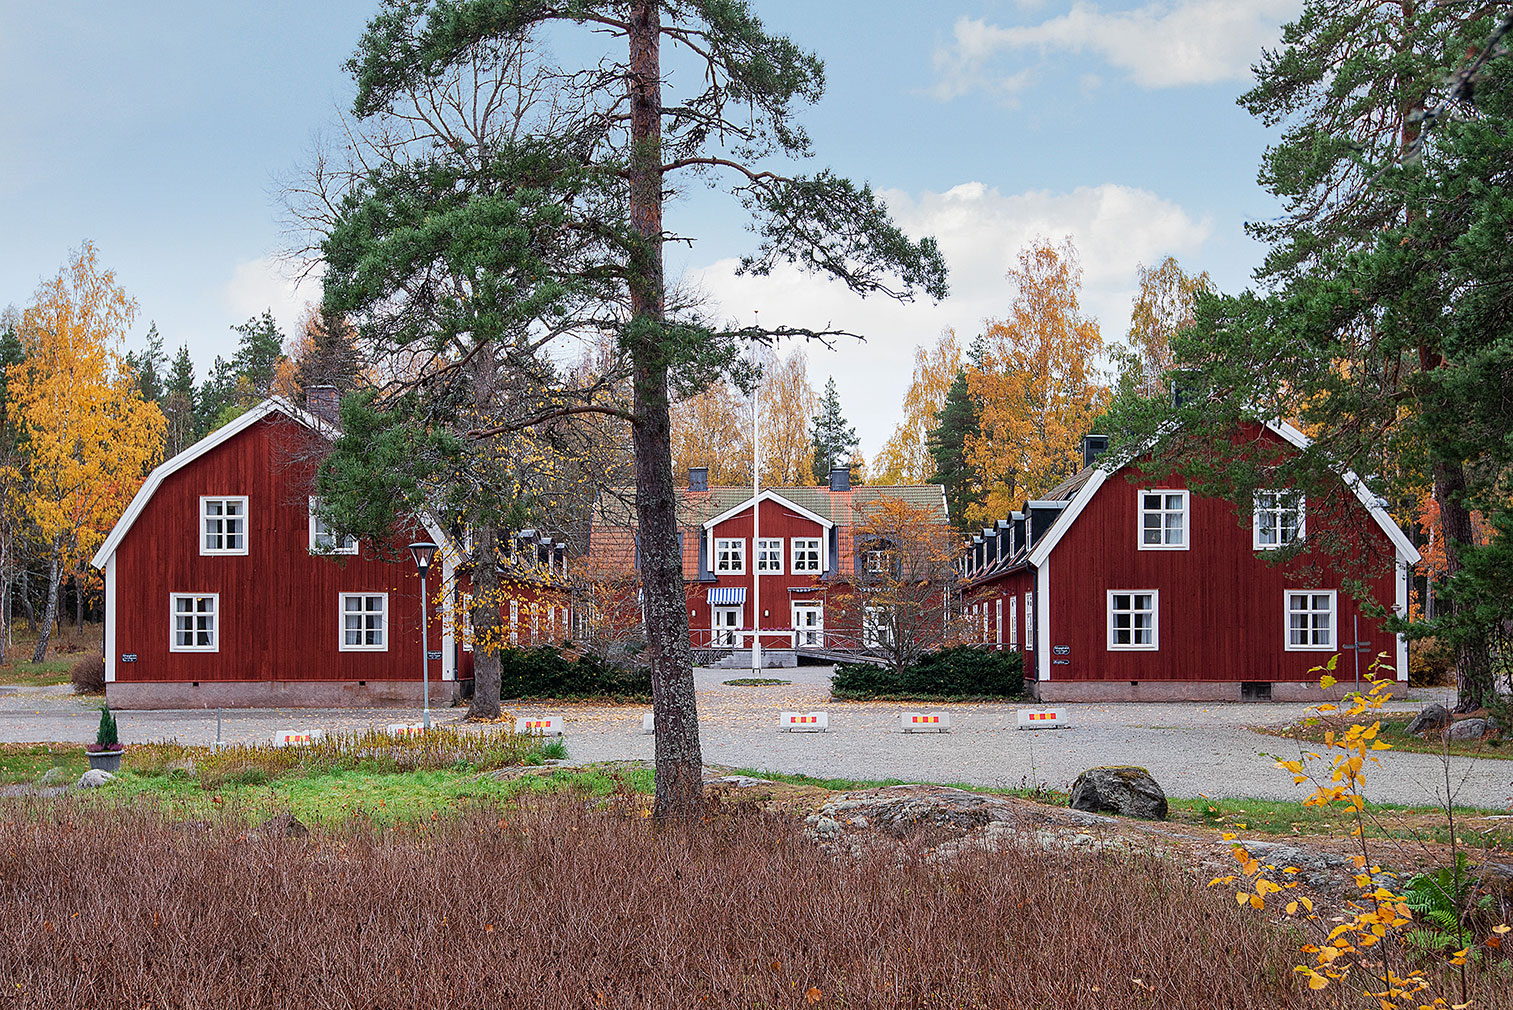 18th century Swedish wellness village Sätra Brunn with Wes Anderson vibes asks for £5.9m